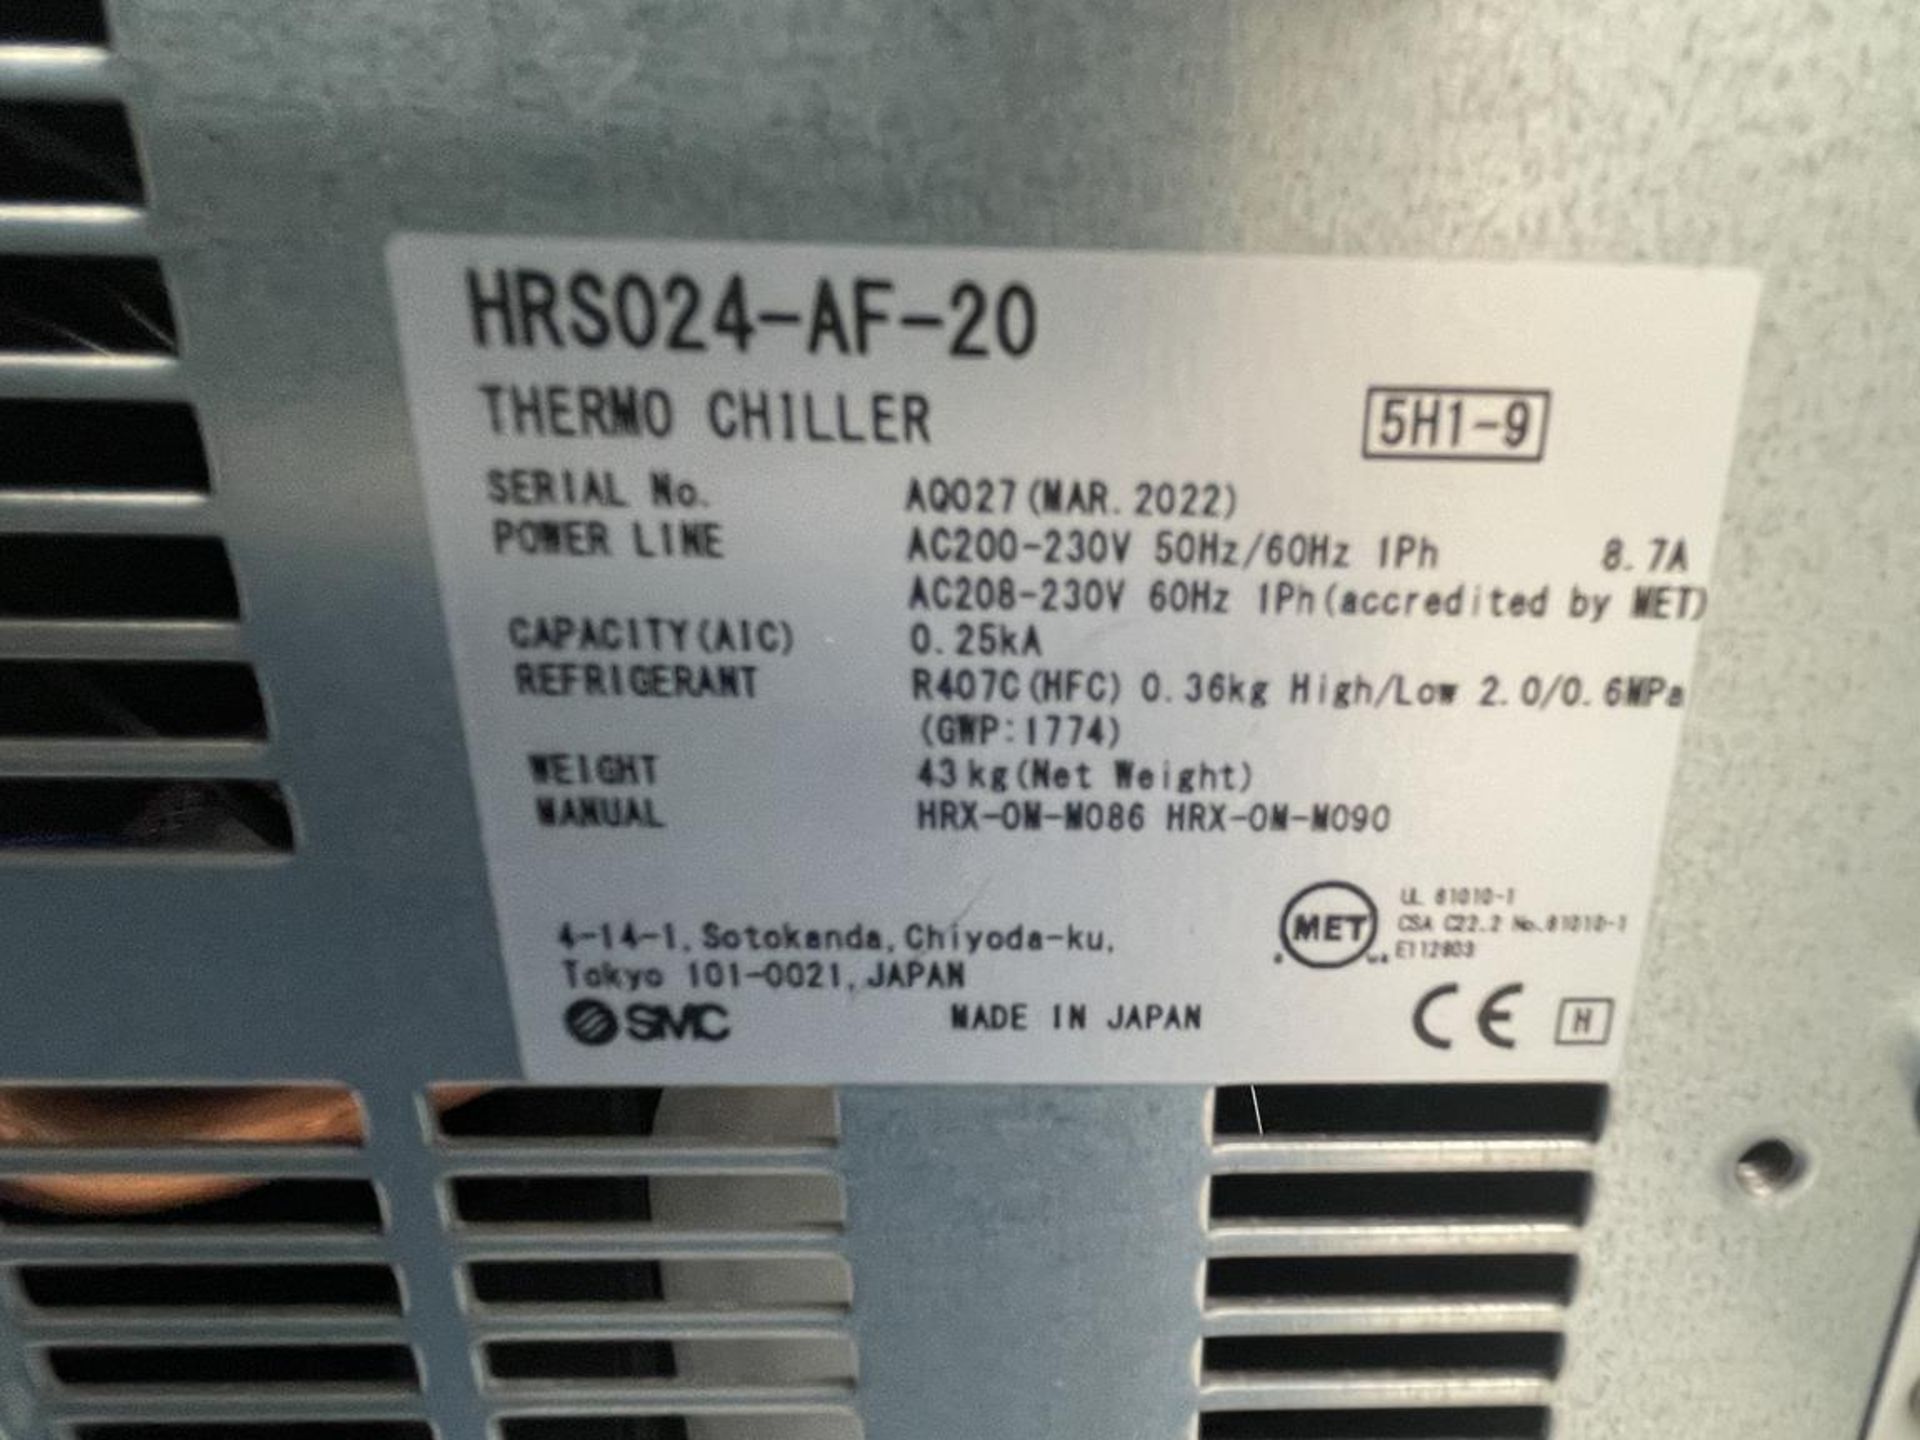 SCM S&A, HRS024-AF-20 thermo chiller, Serial No. AQ027 (DOM: 2021) - Image 2 of 2